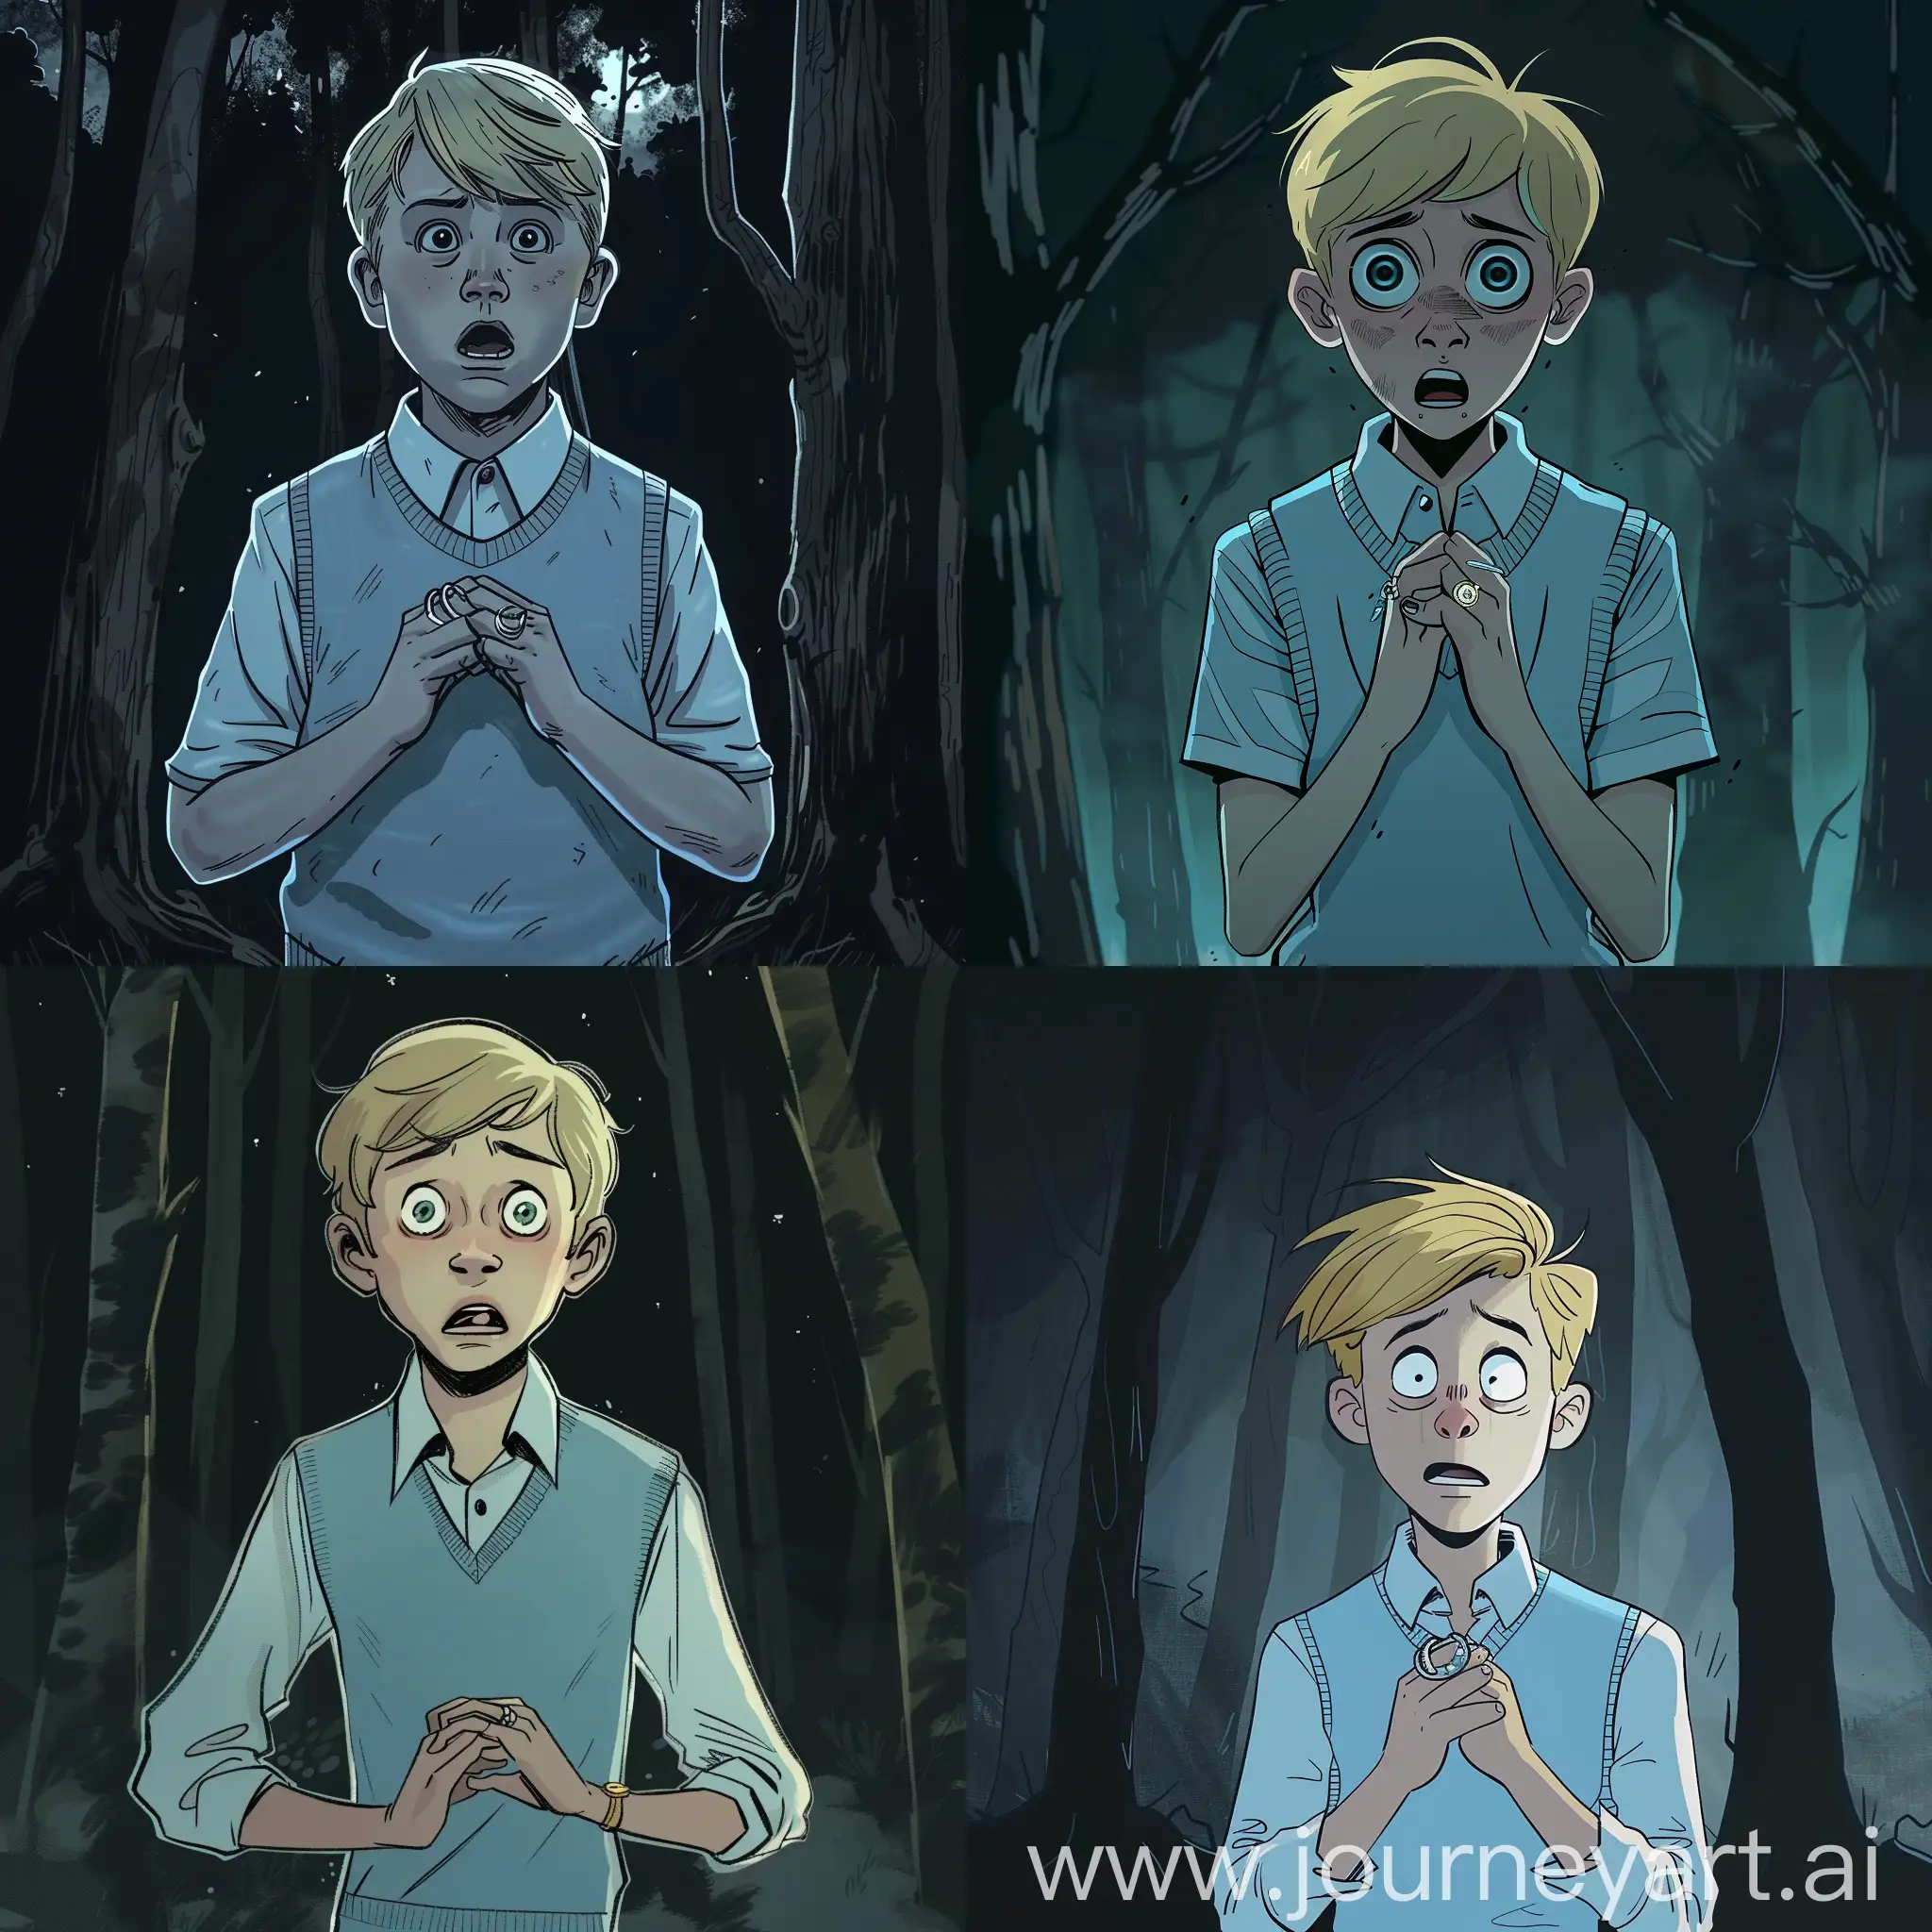 animated drawing, night, dark theme, forest, teenager, a boy with blonde hair middle part haircut and wearing light blue sweater vest, rings, looking scared because he is lonely